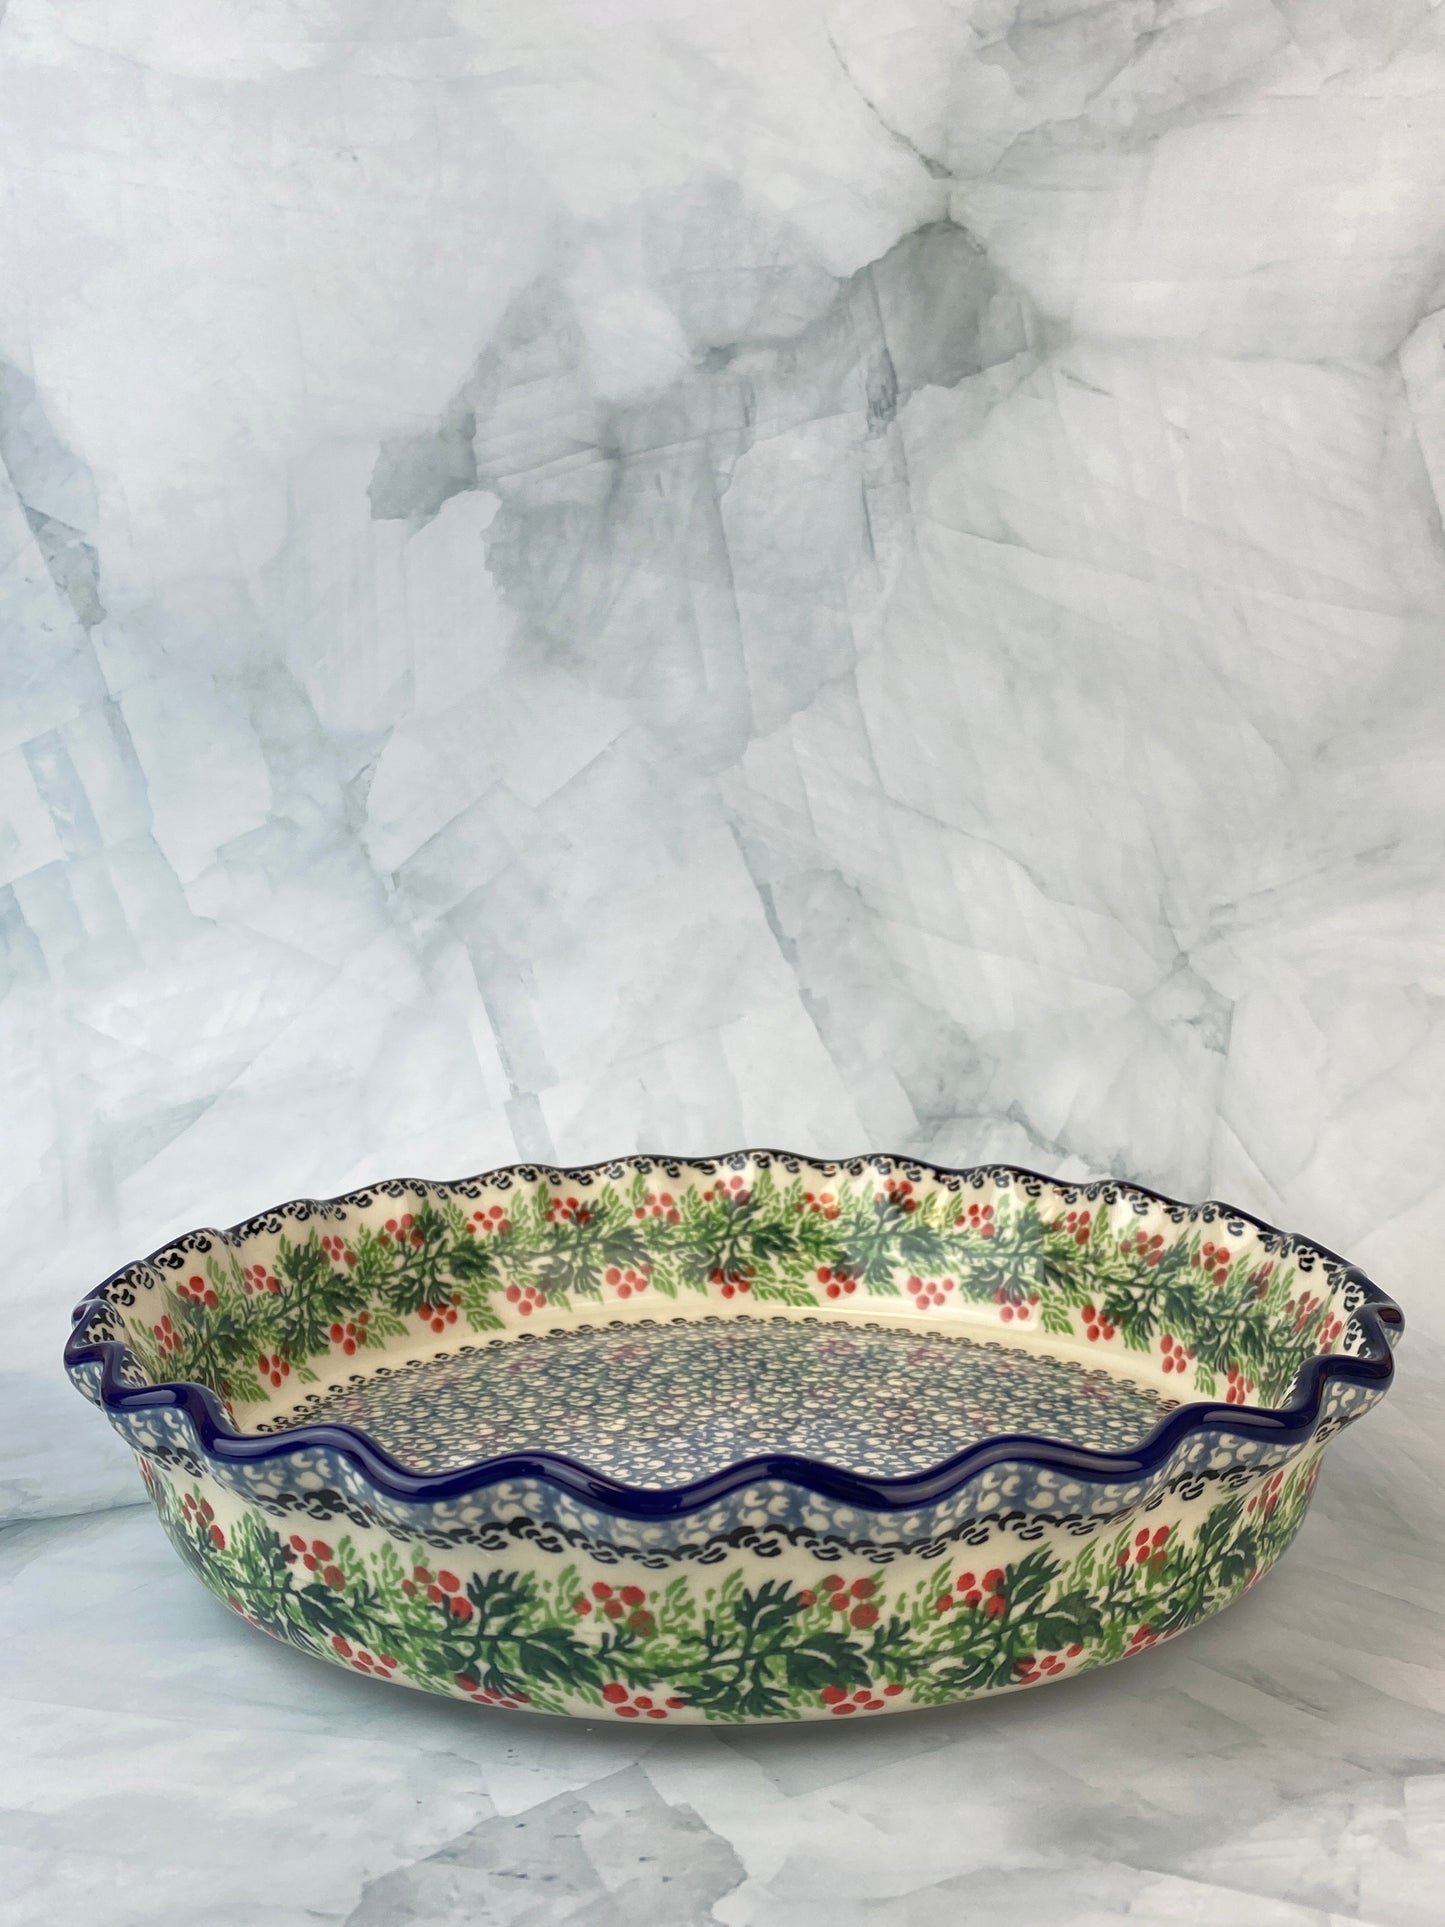 HOLIDAY SPECIAL Ruffled Pie Plate / Round Baking Dish - Shape 636 - Pattern 1734